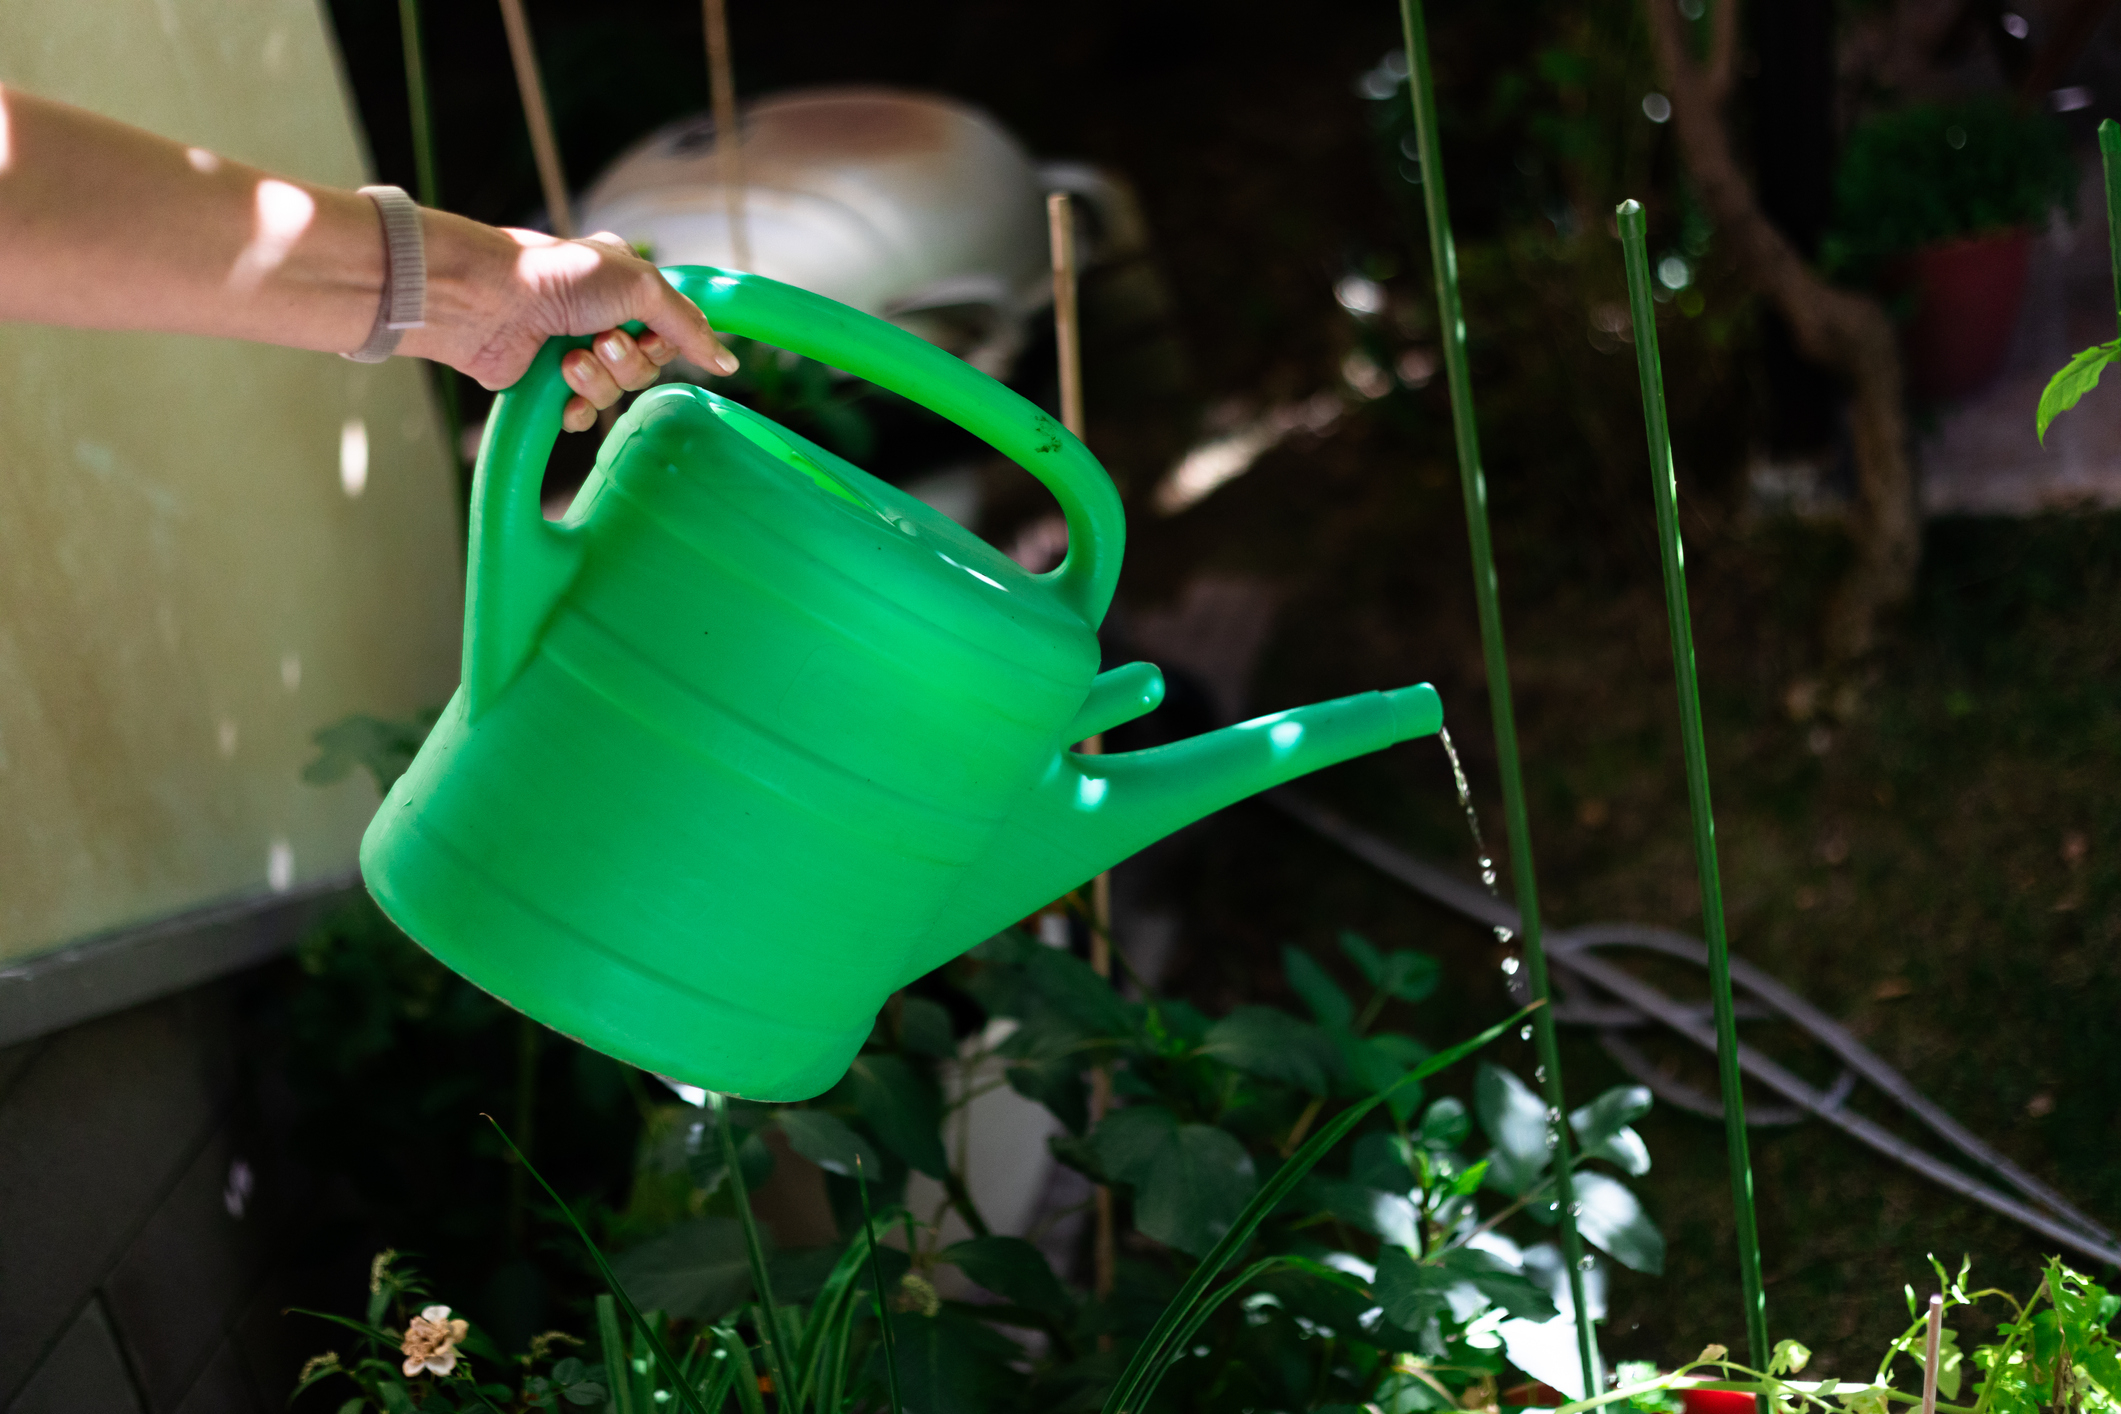 Someone using a green watering can to water plants